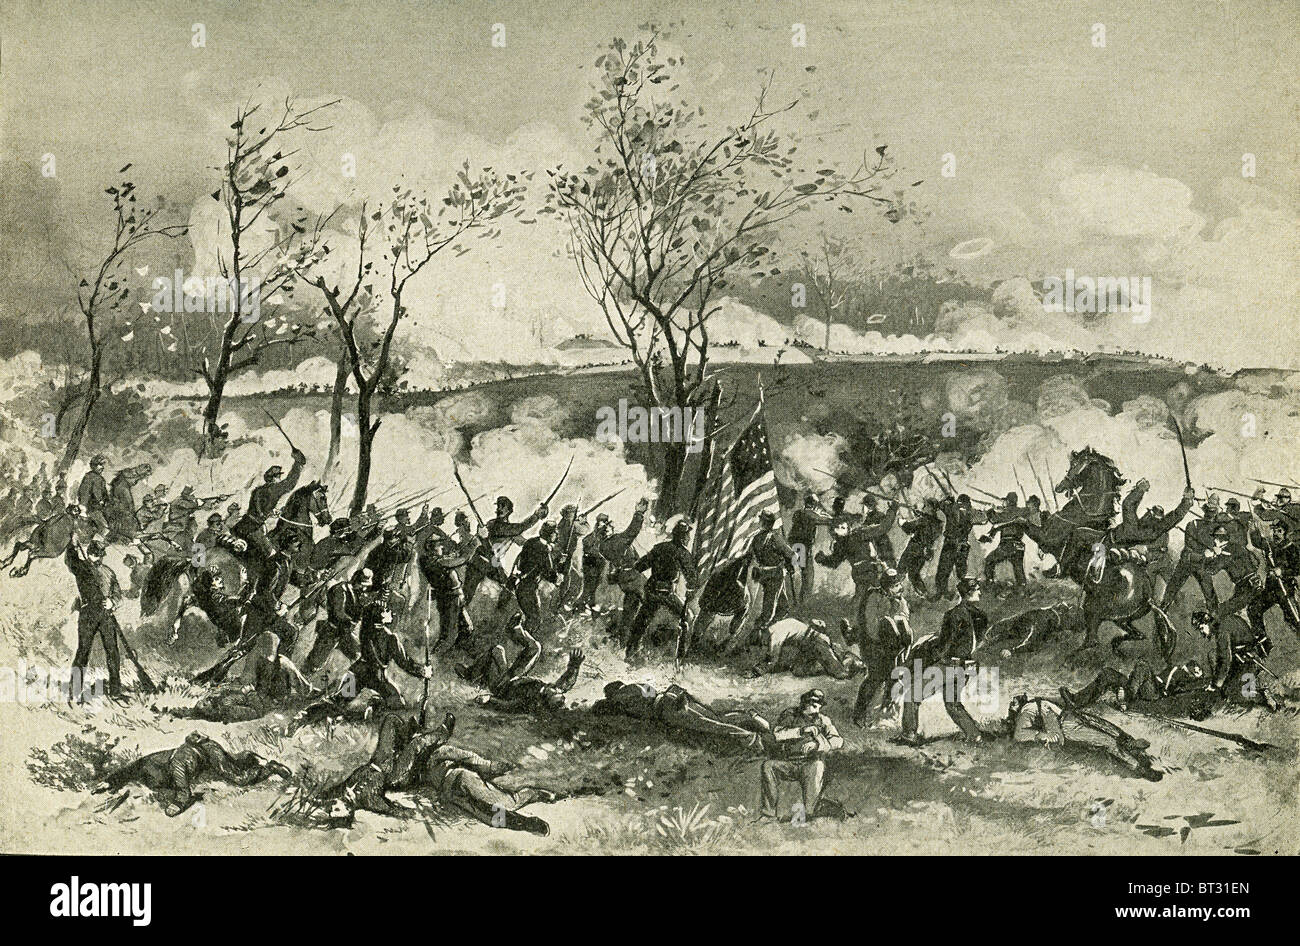 This 1898 illustration shows Union troops marching forward at Fort Donelson and attacking Confederates. Stock Photo